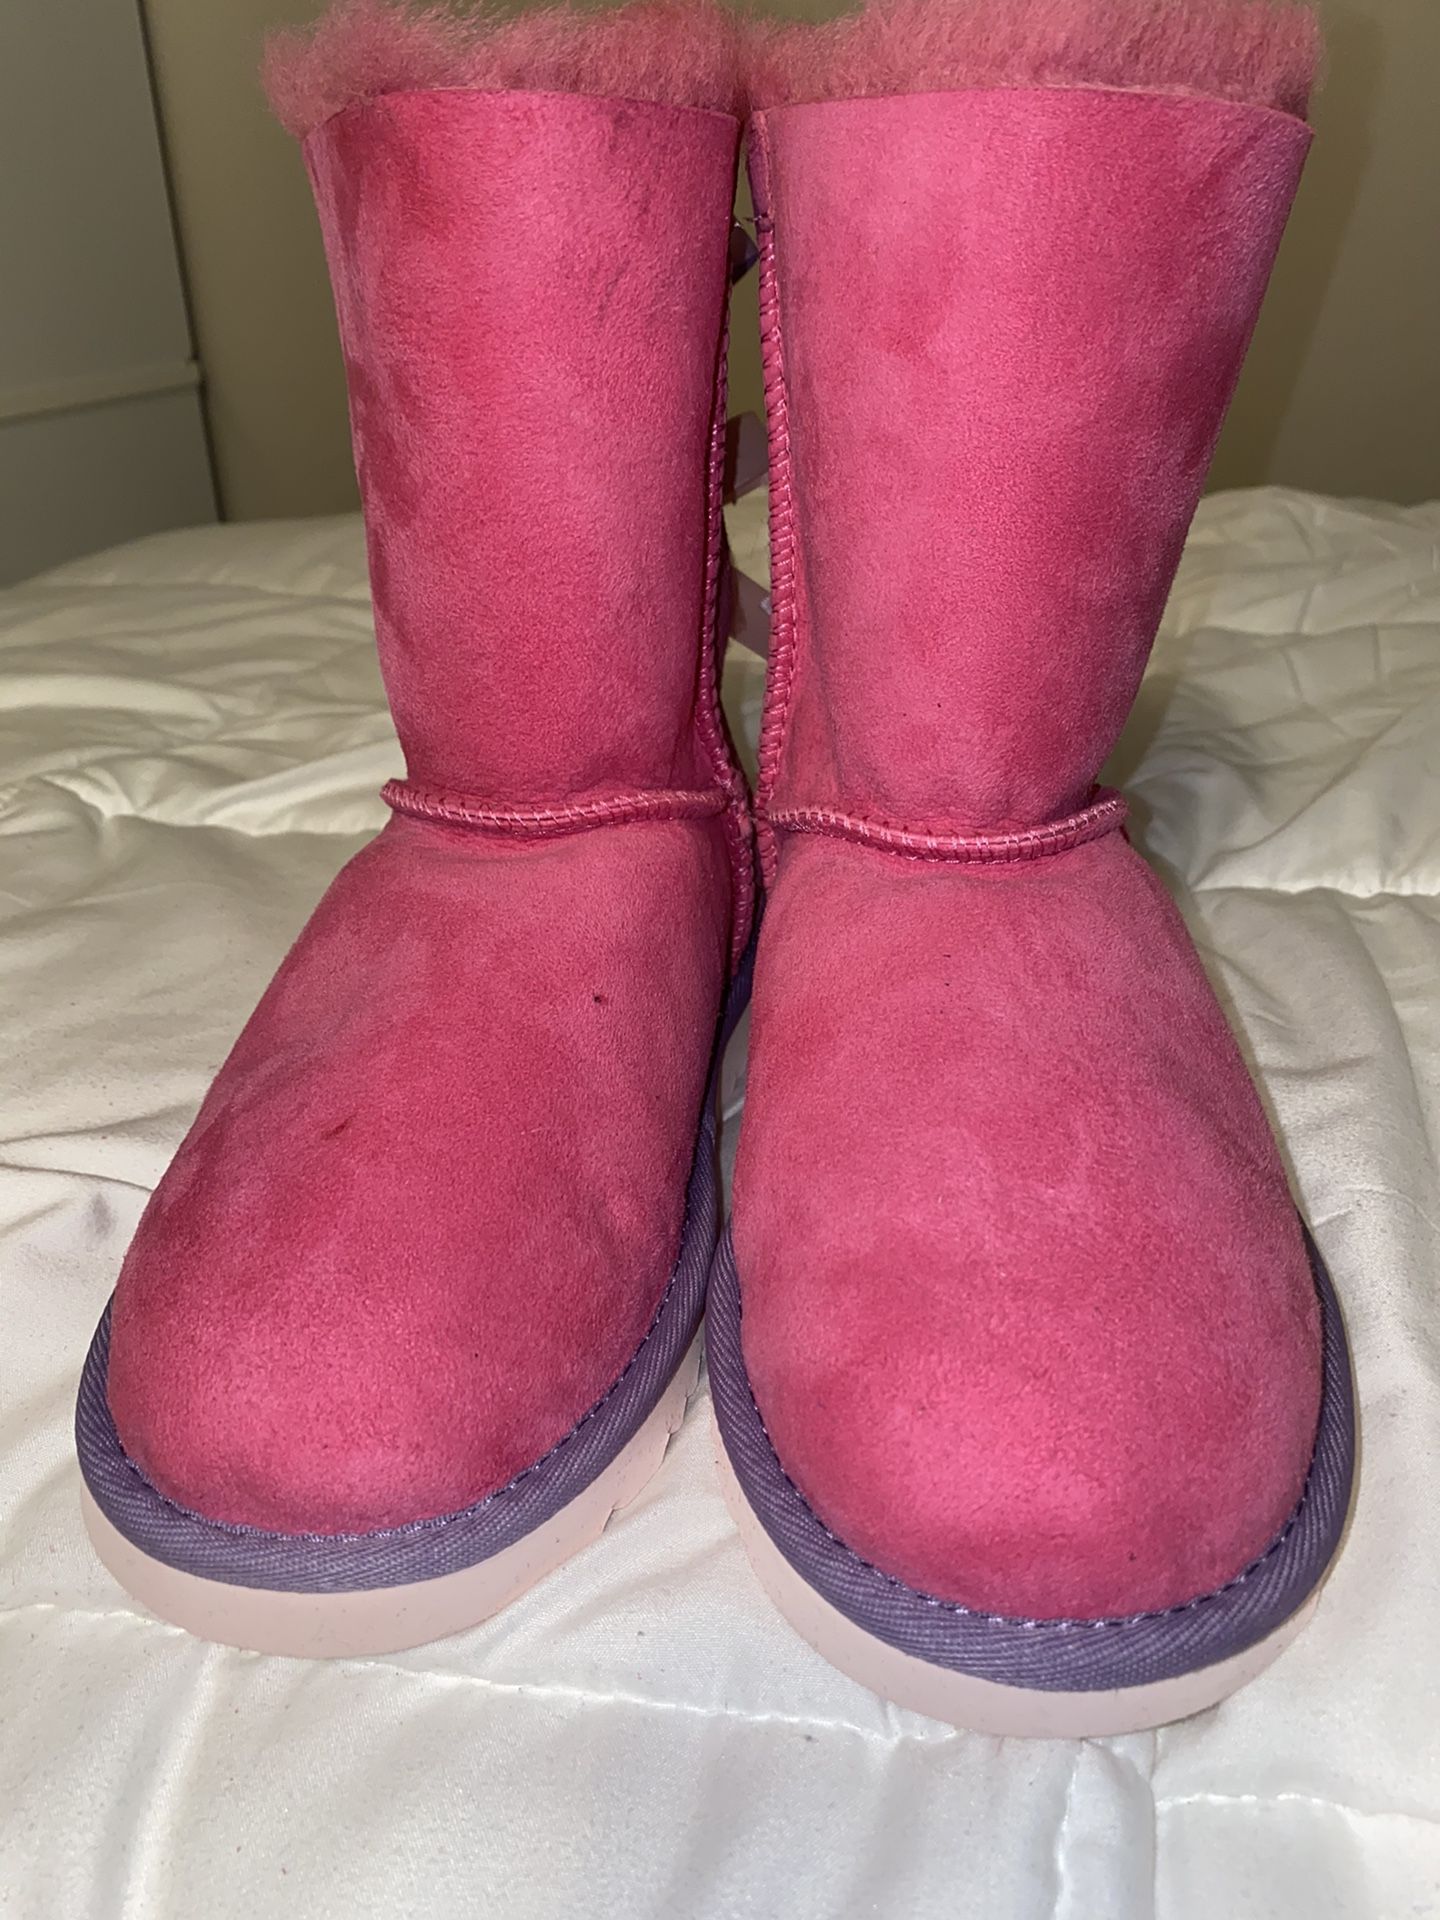 Brand New Ugg Boots - Size 4